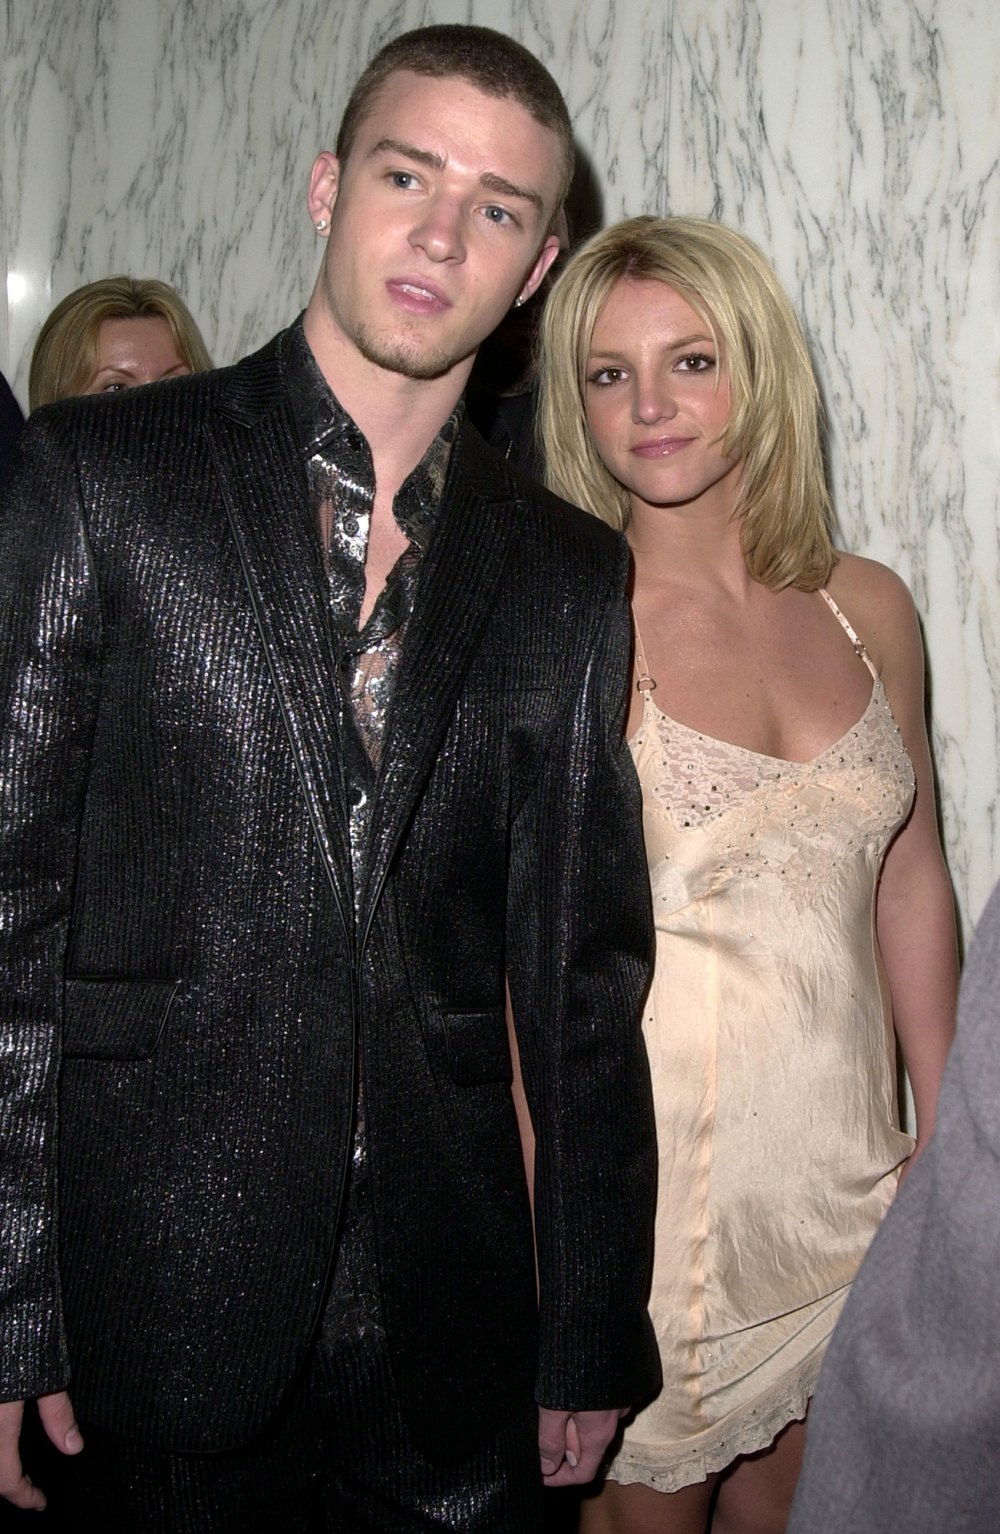 Justin Timberlake Talks 'Urge’ to Write ‘Dirty’ Things About Britney Spears in Resurfaced Clip